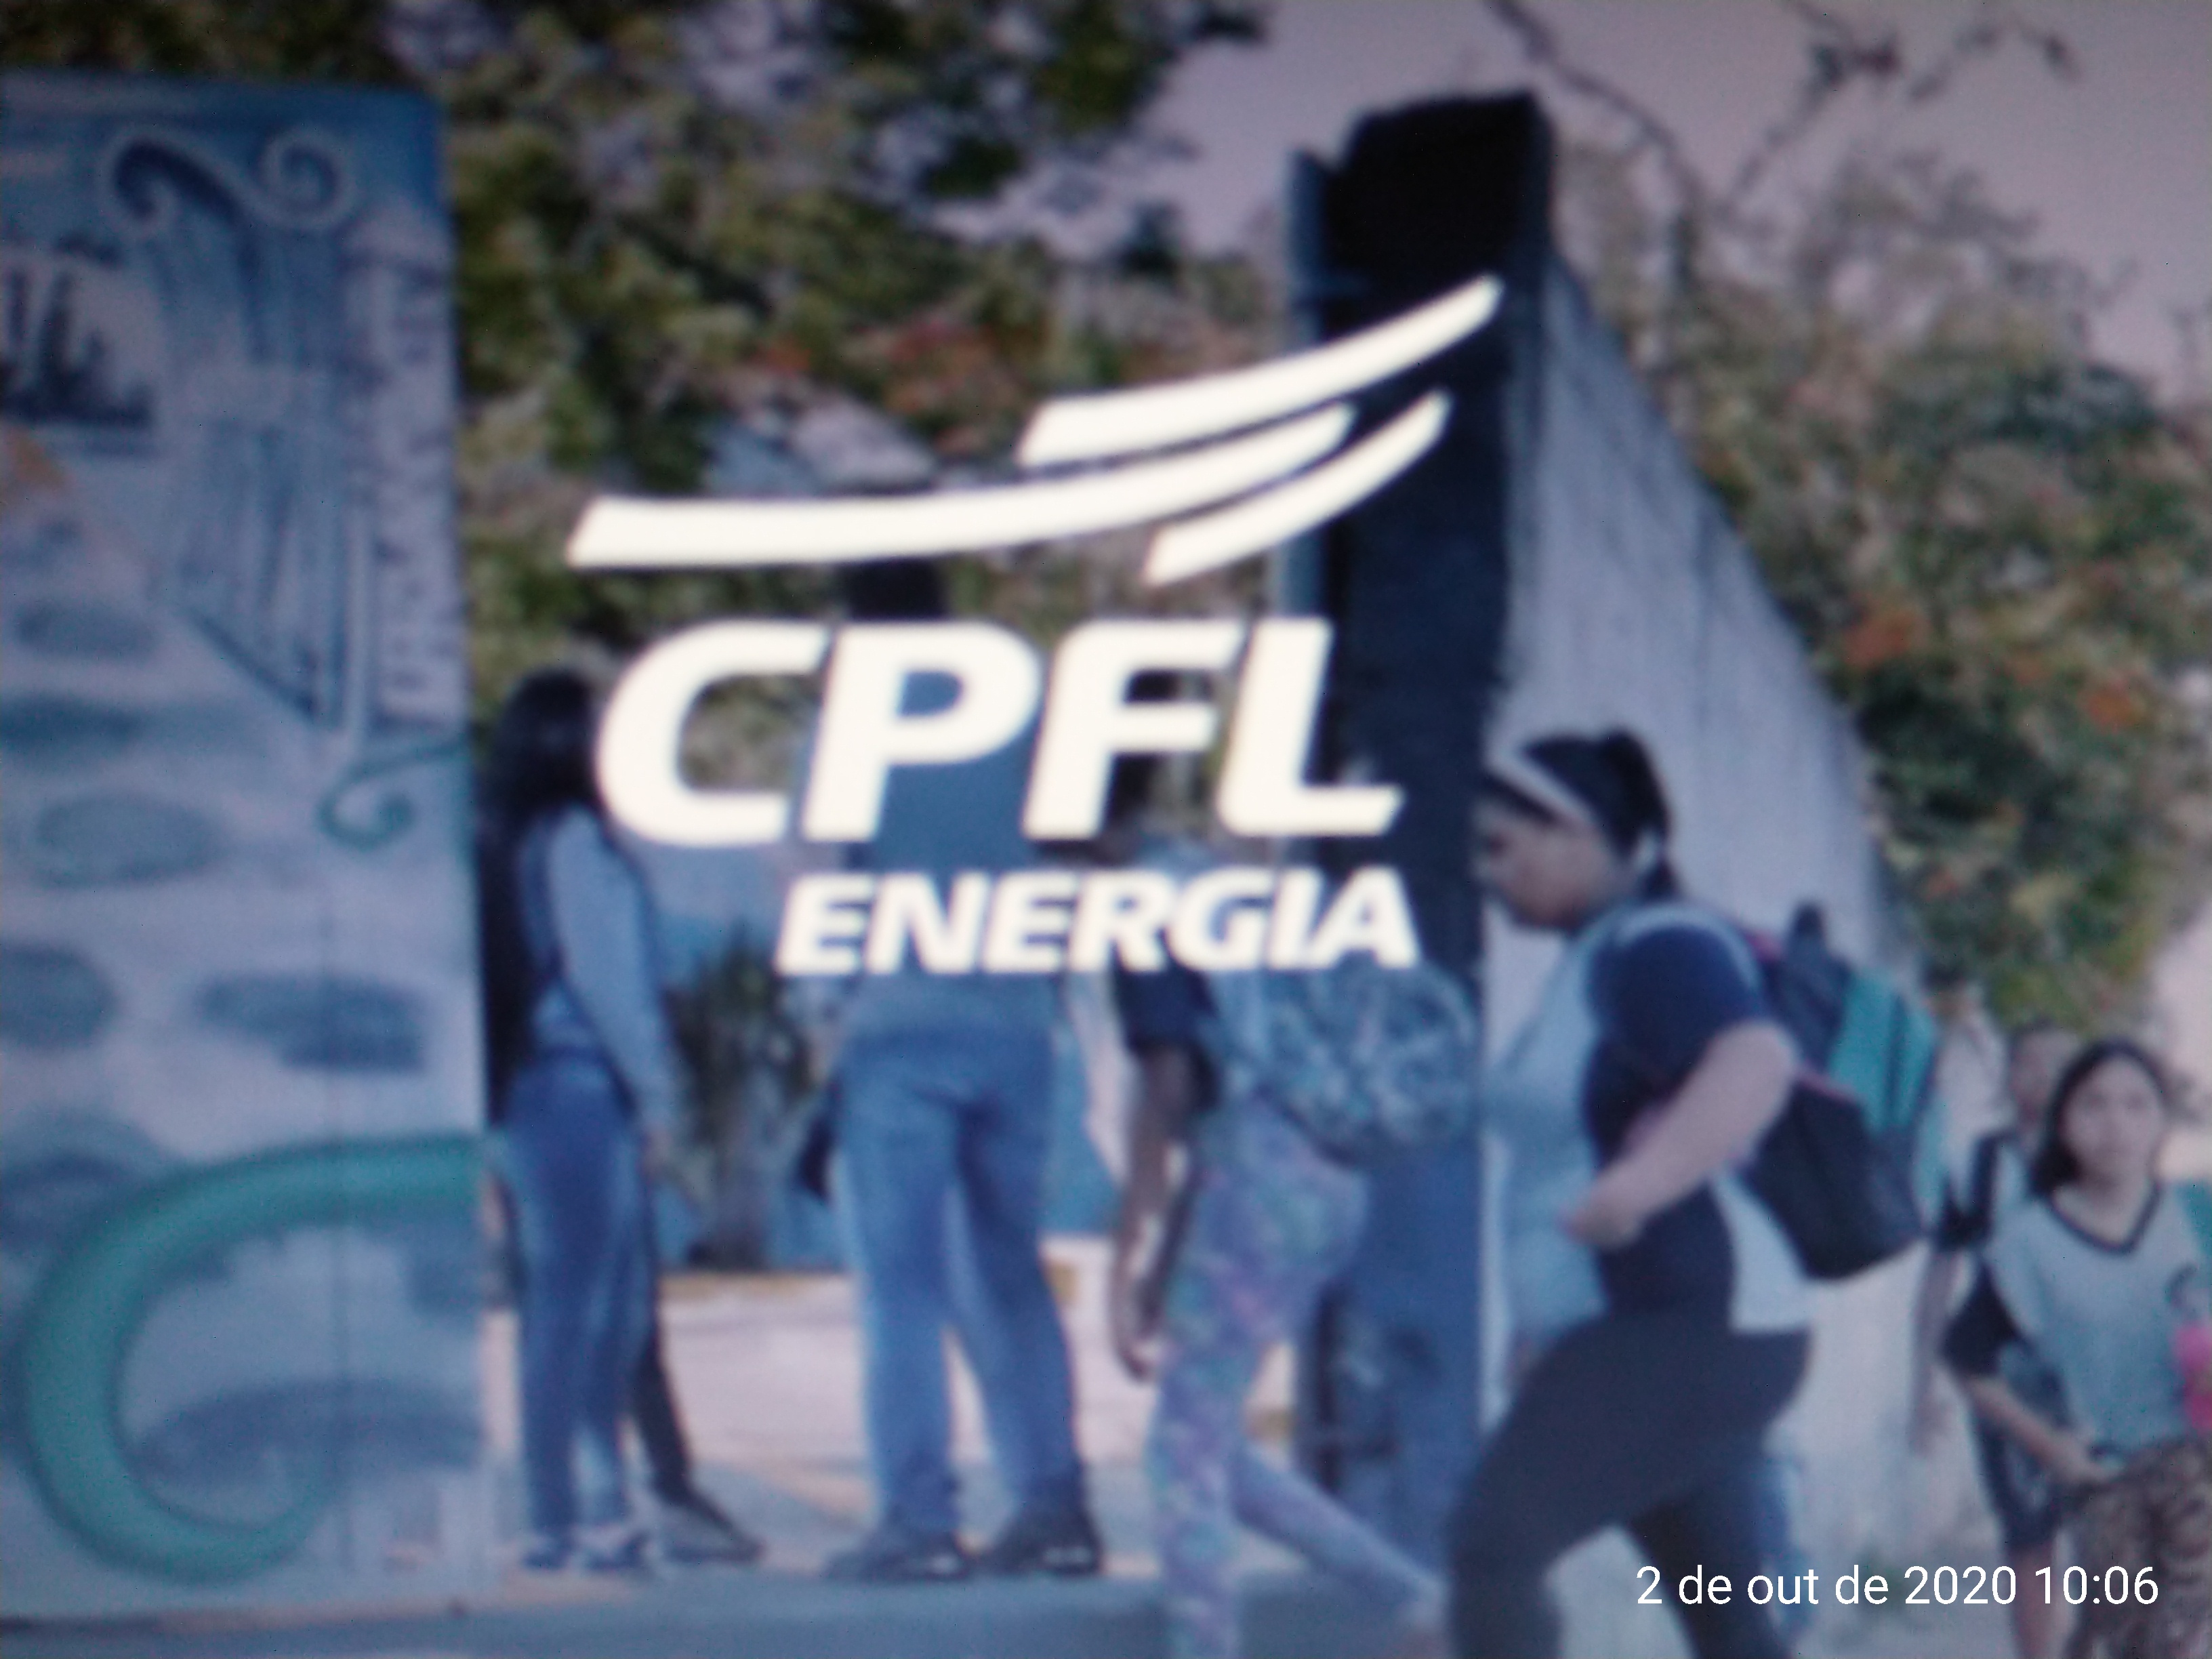 CPFL, ENERGIA!